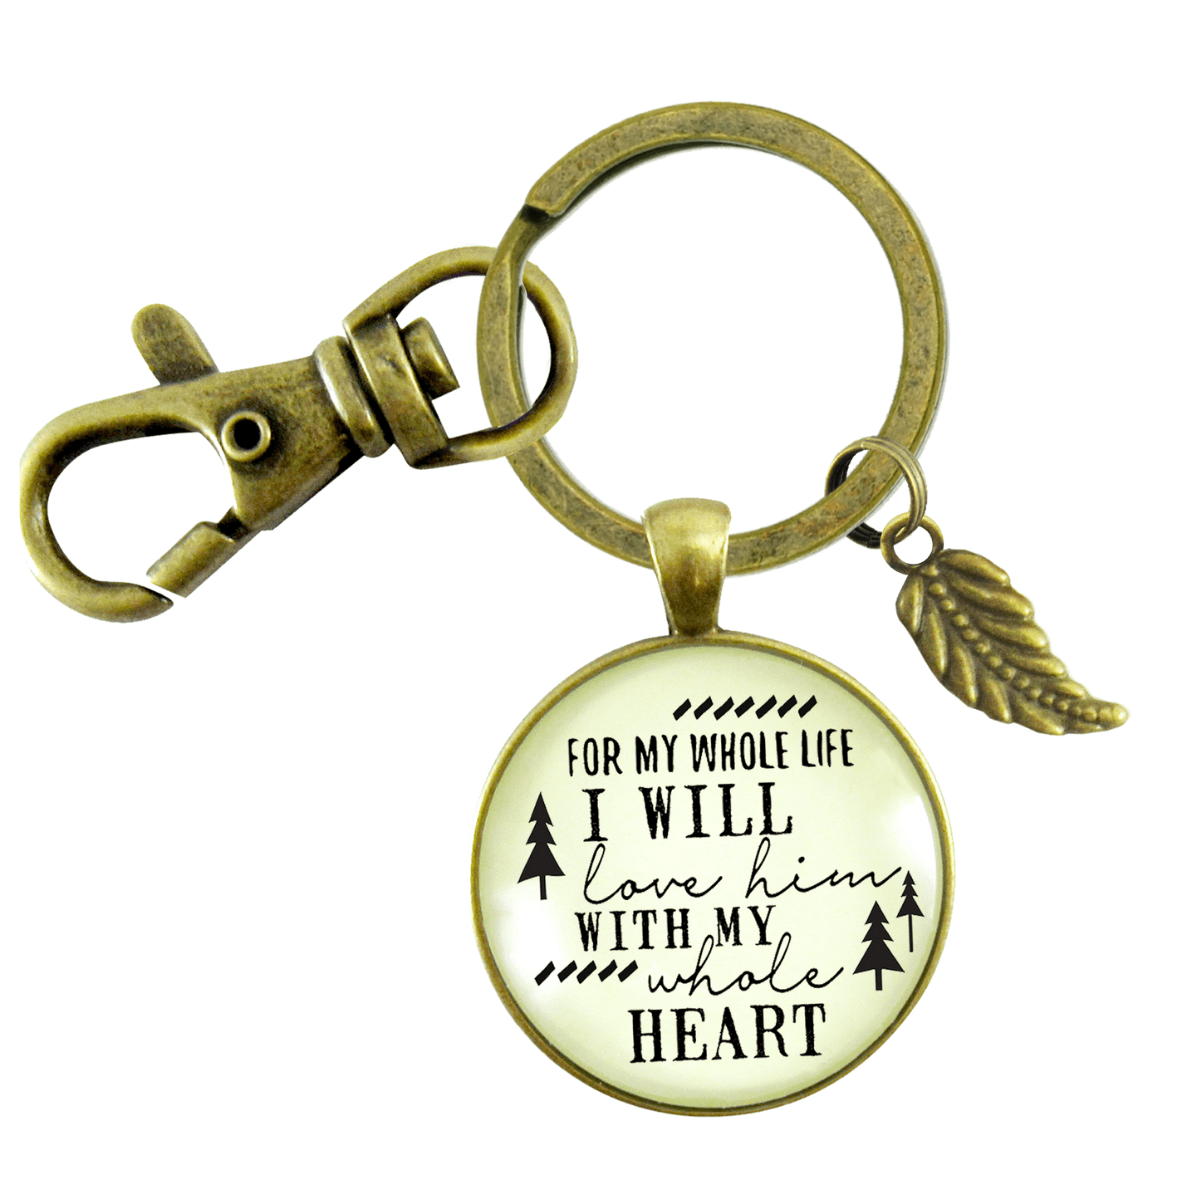 To Her Father In Law Gift Keychain Whole Life I Love Him Promise From Bride Wedding Mens Key Ring - Gutsy Goodness